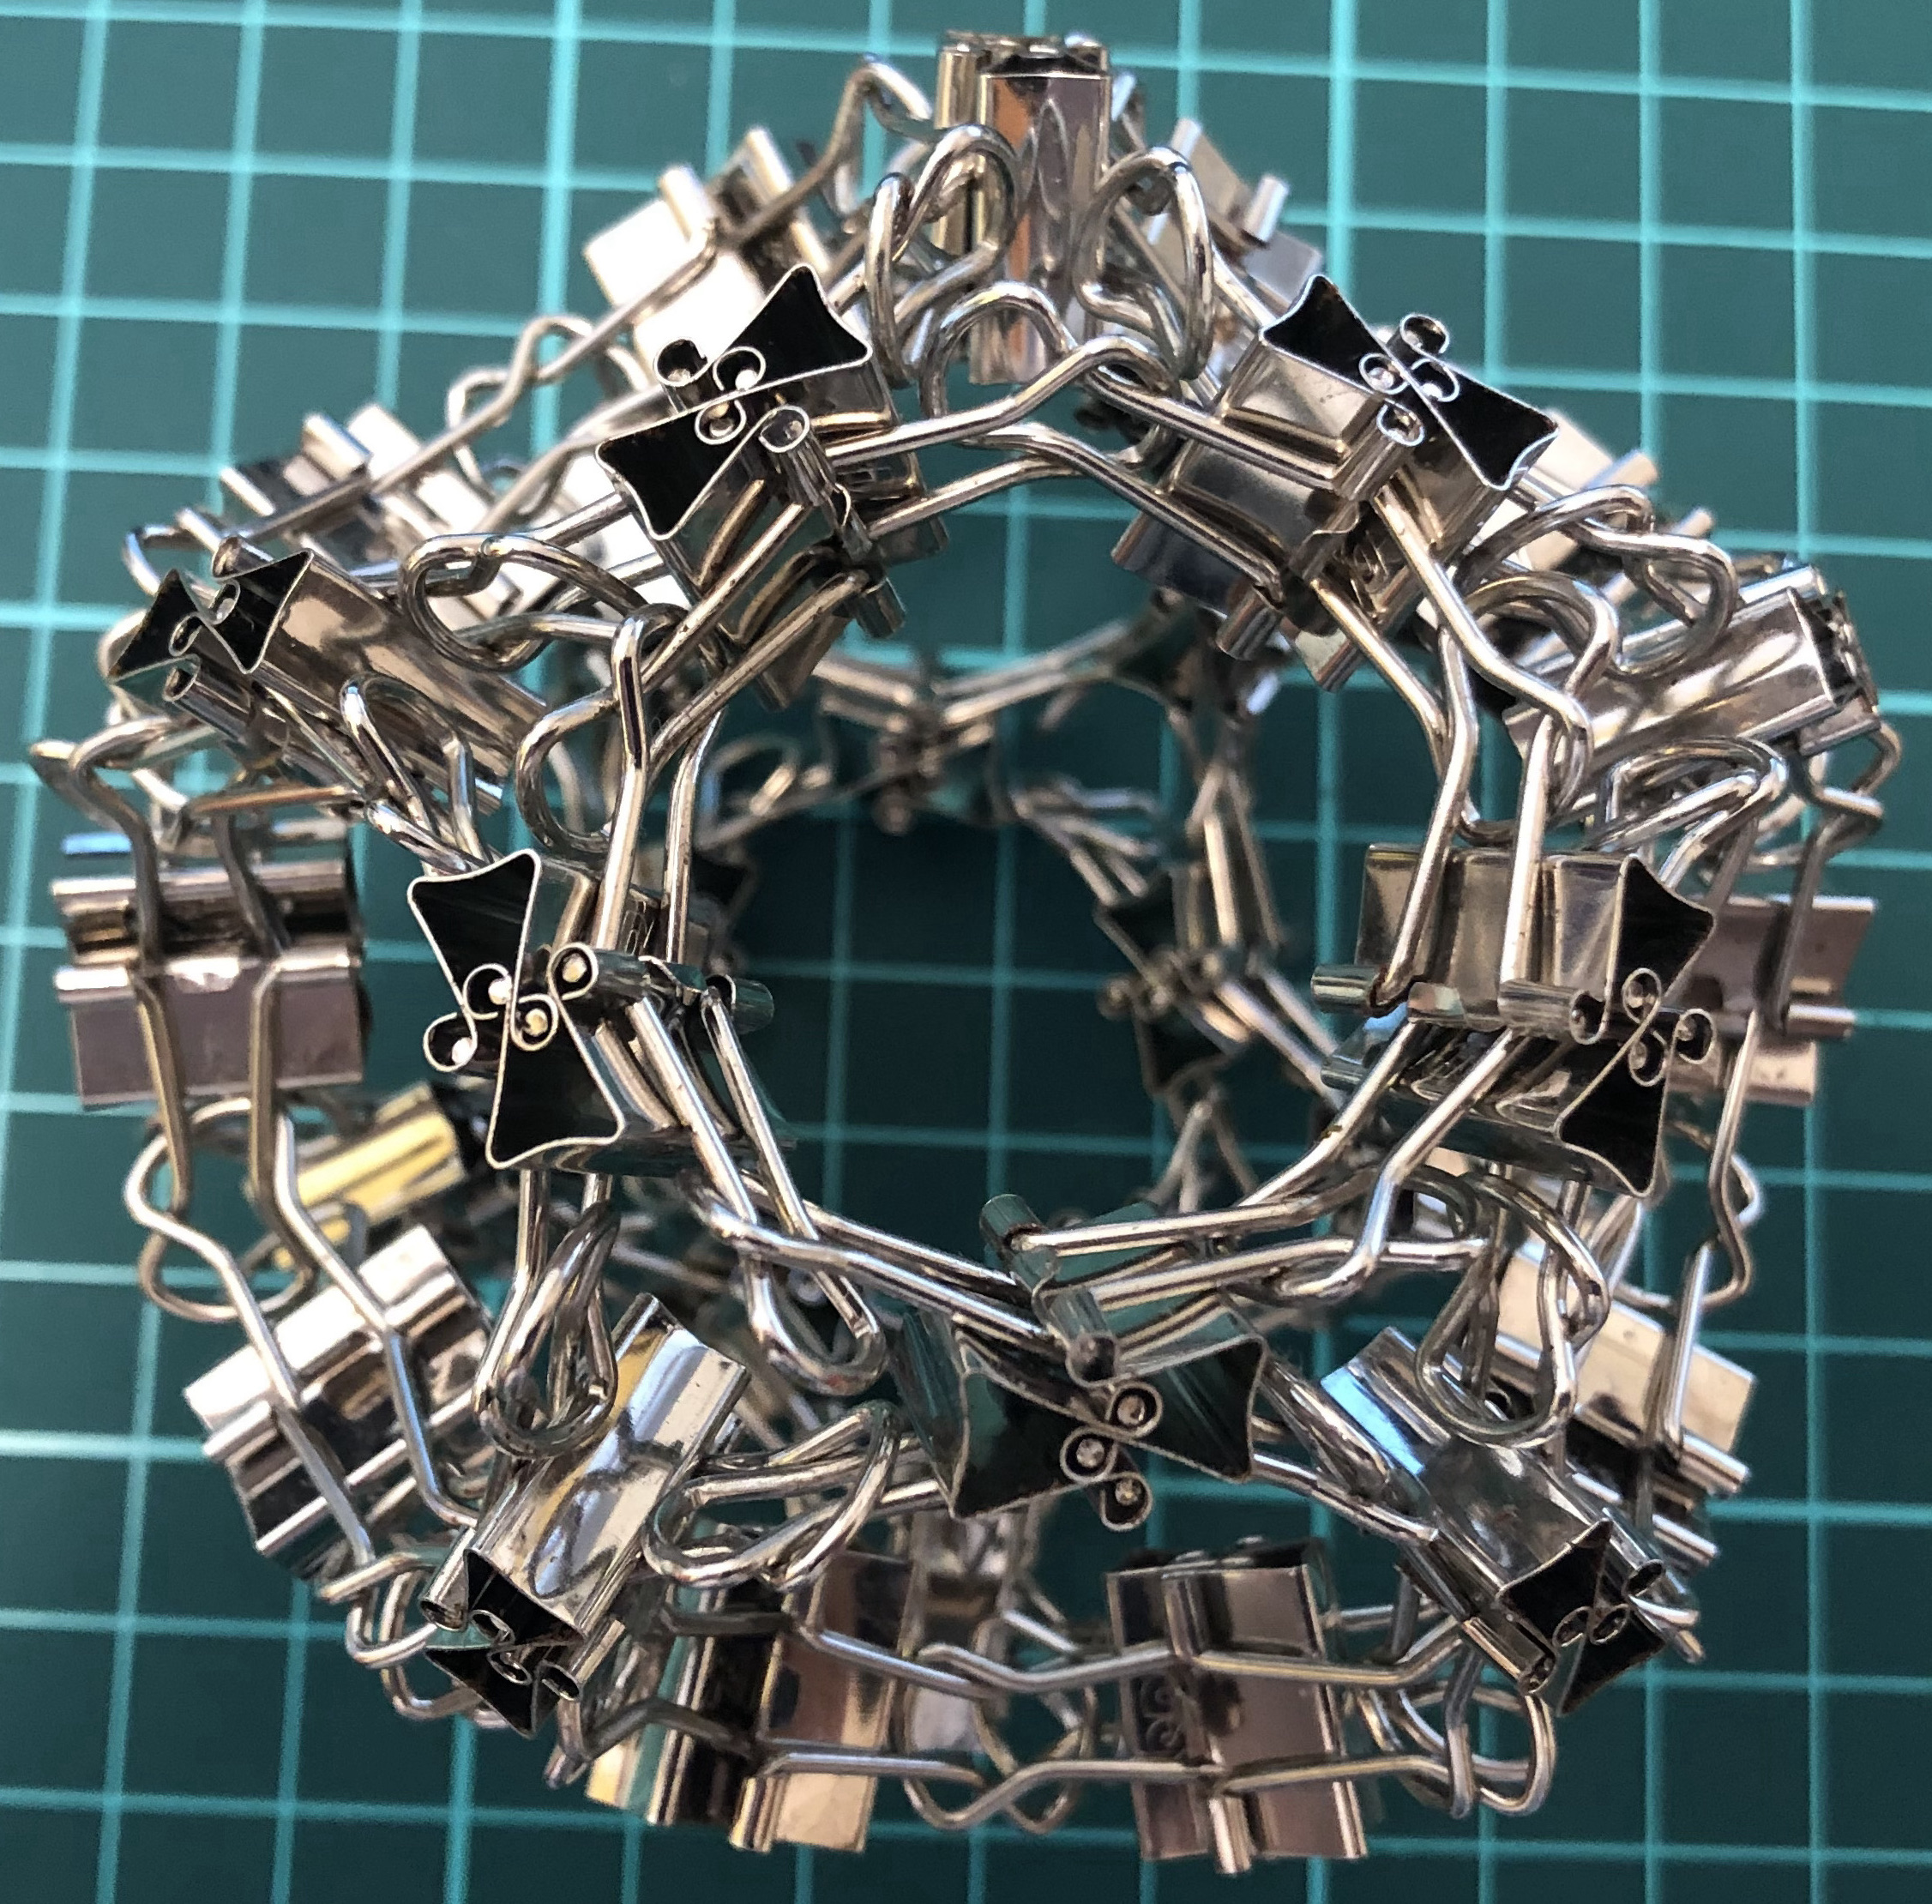 60 clips forming 30 X-edges forming dodecahedron